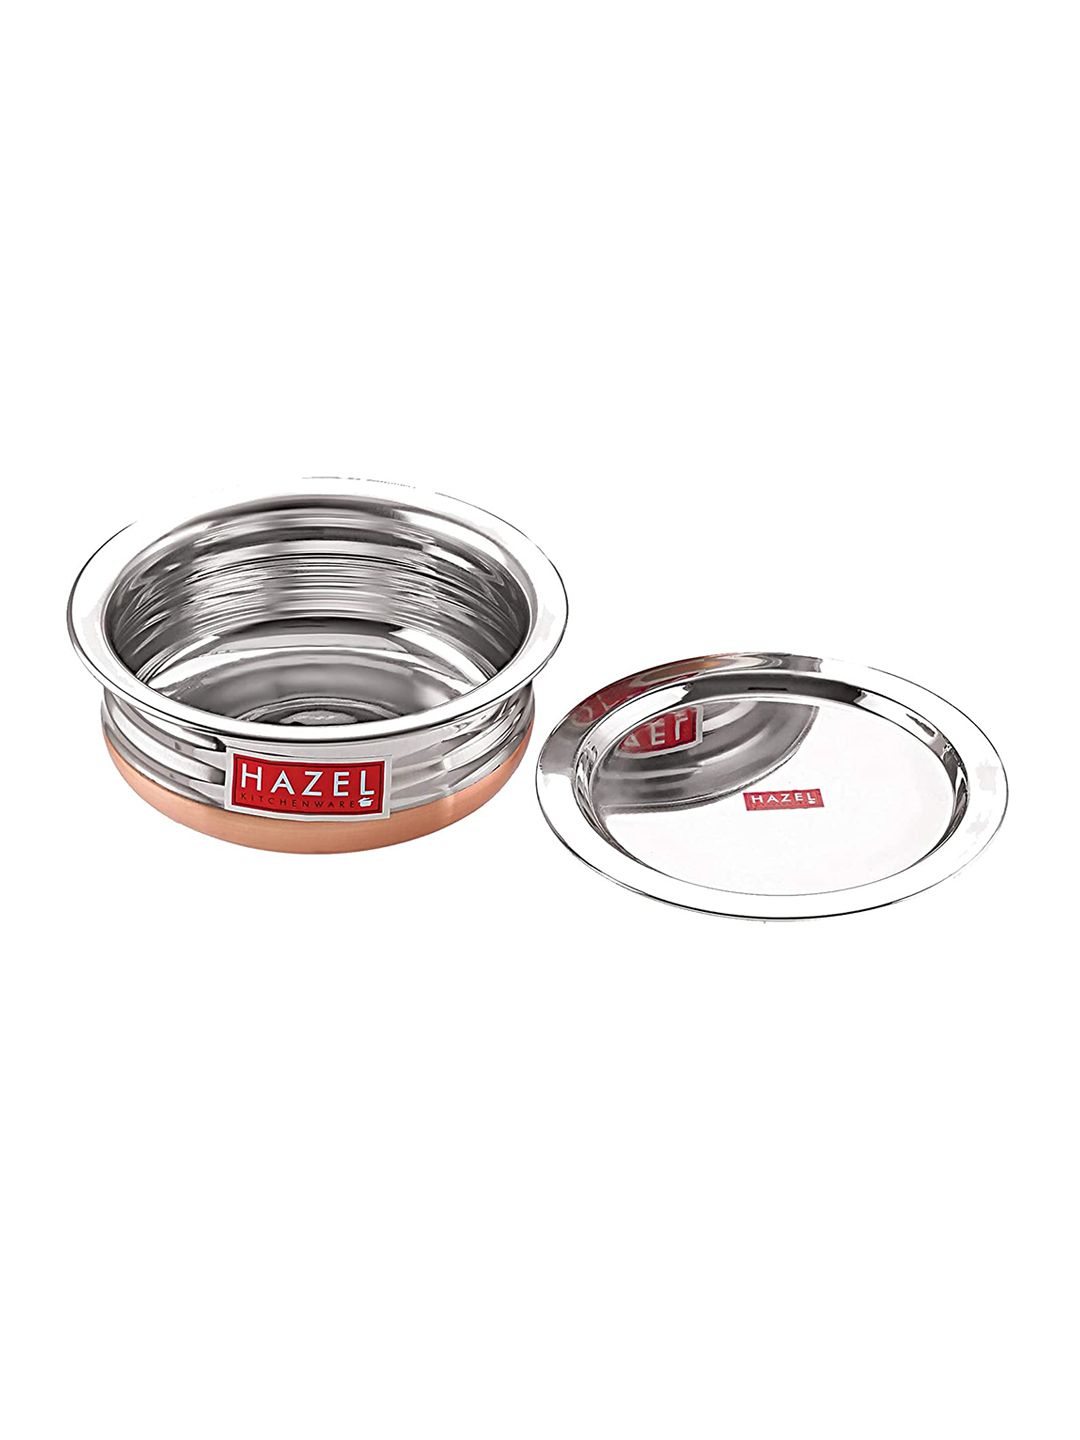 HAZEL Silver-Toned Stainless Steel Serving Tope Handi Price in India